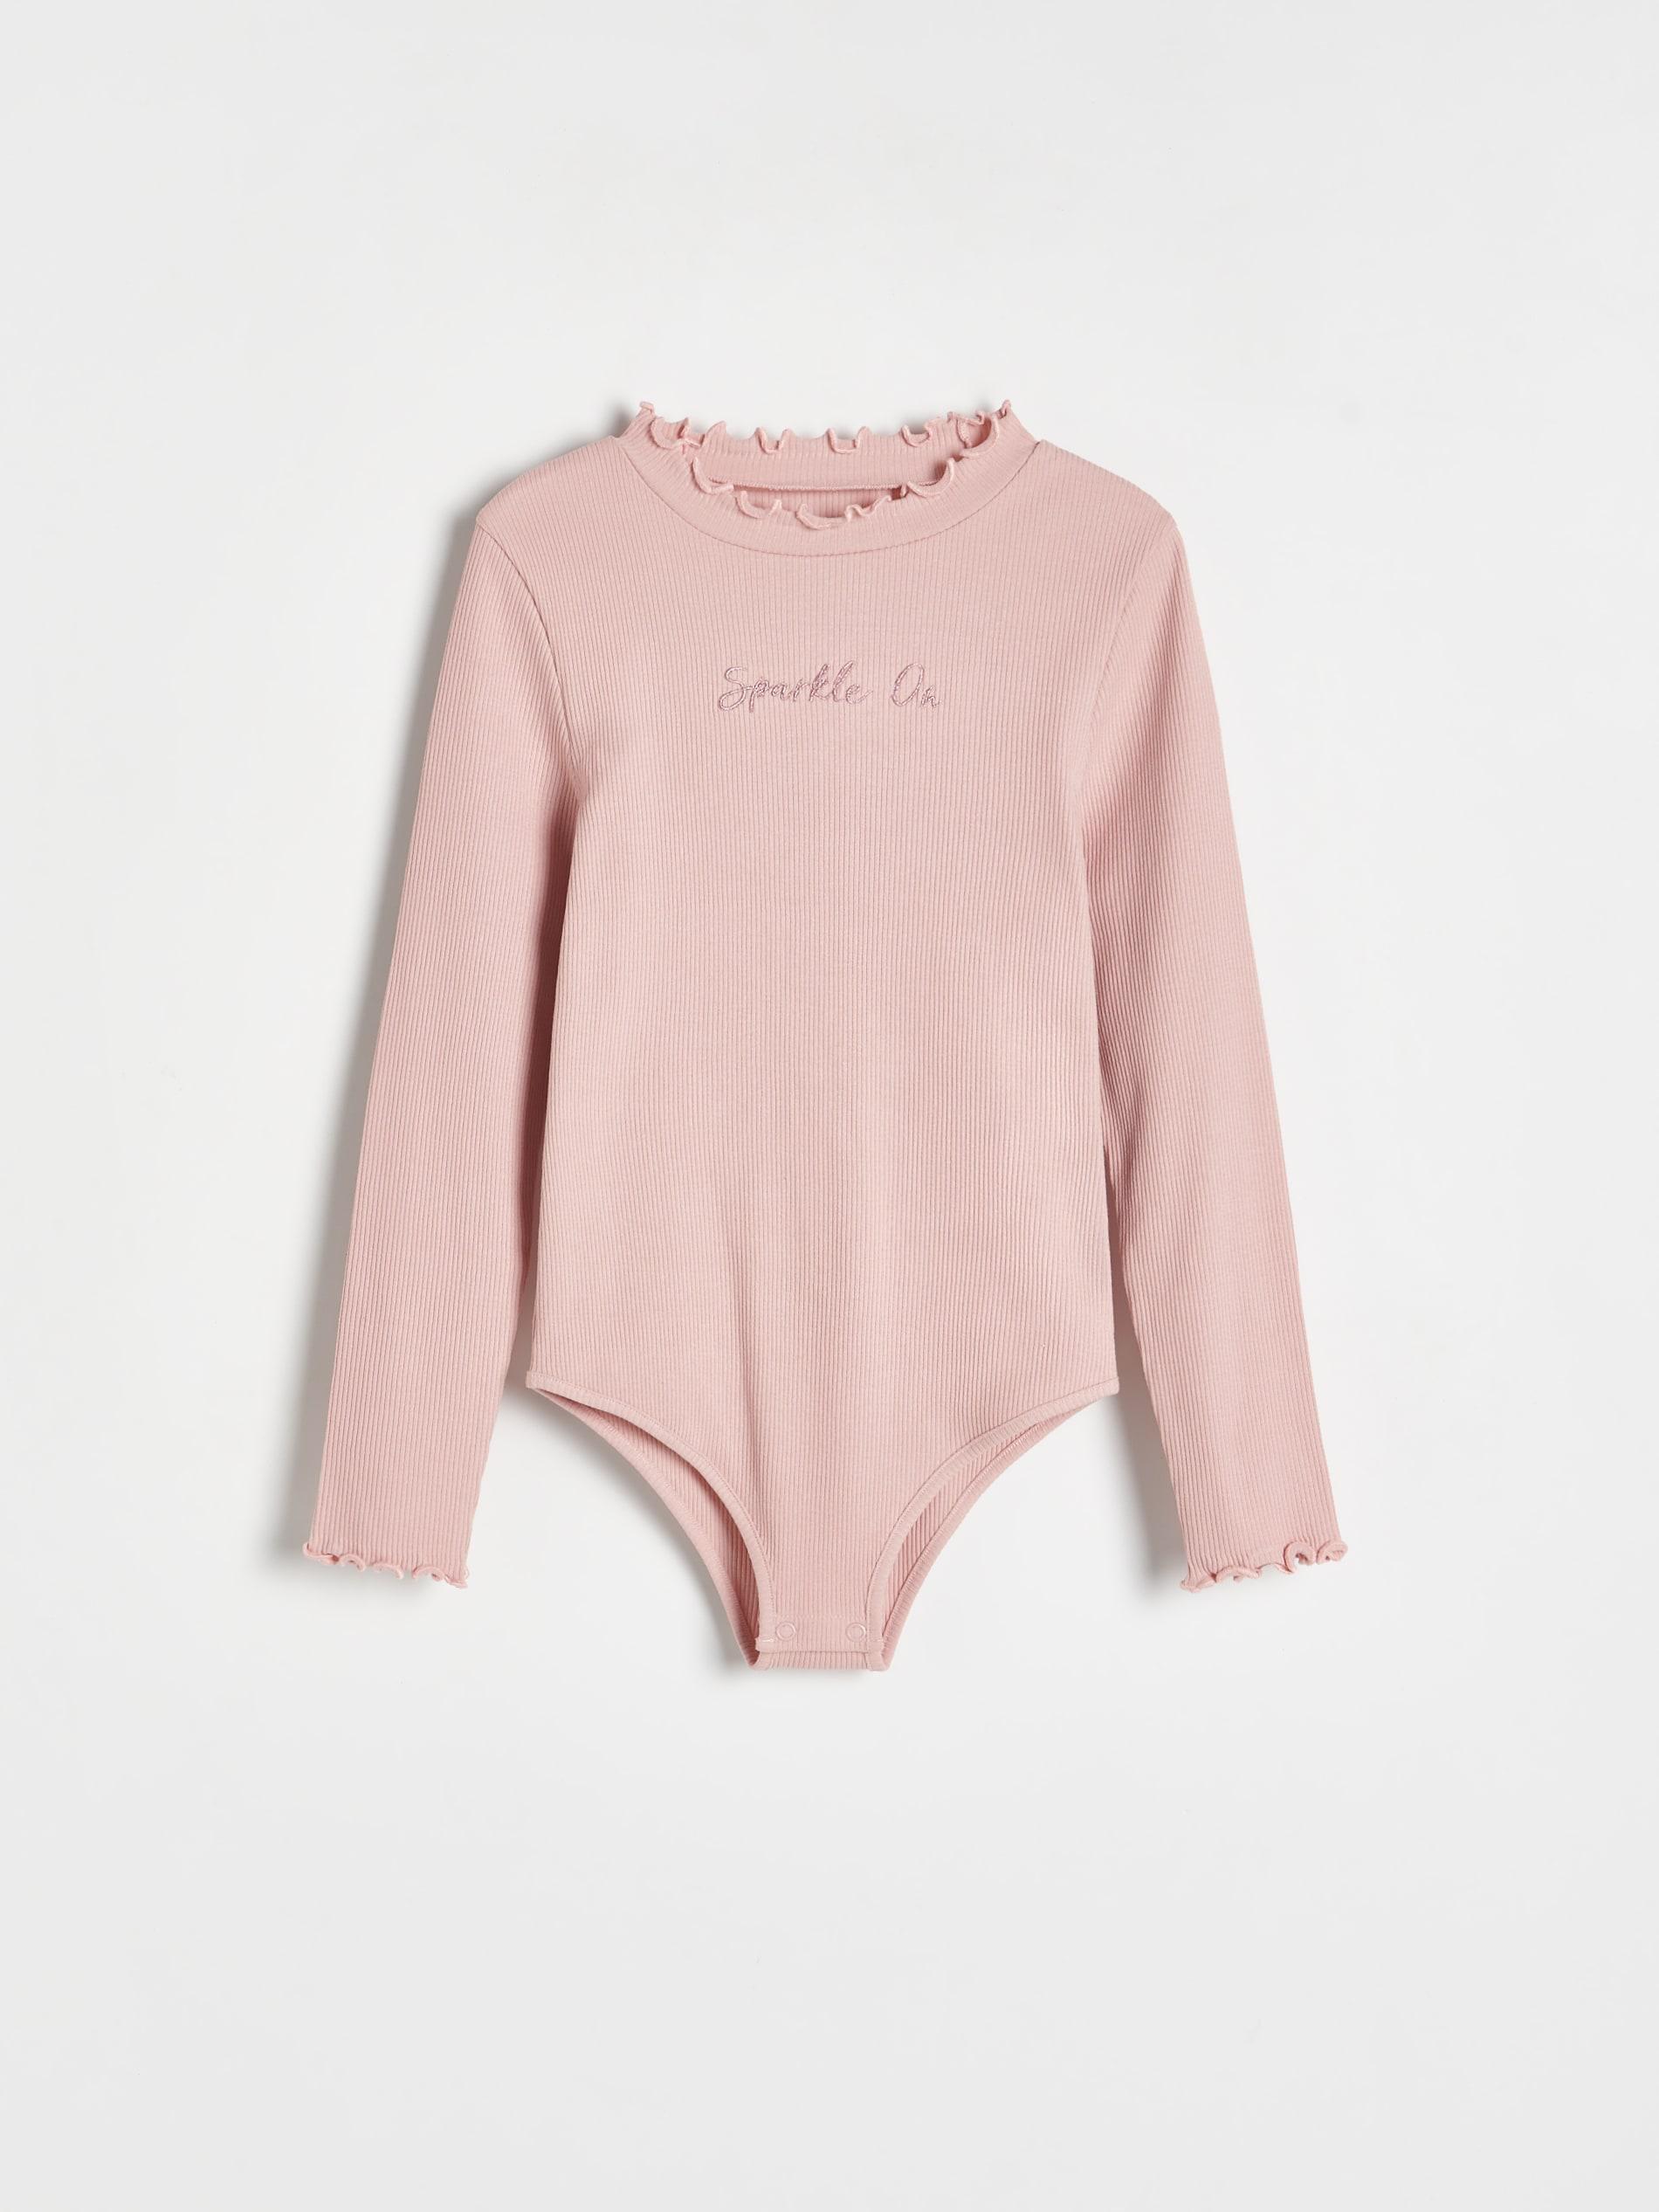 Reserved - Pink Embroidery Cotton Bodysuit, Kids Girls